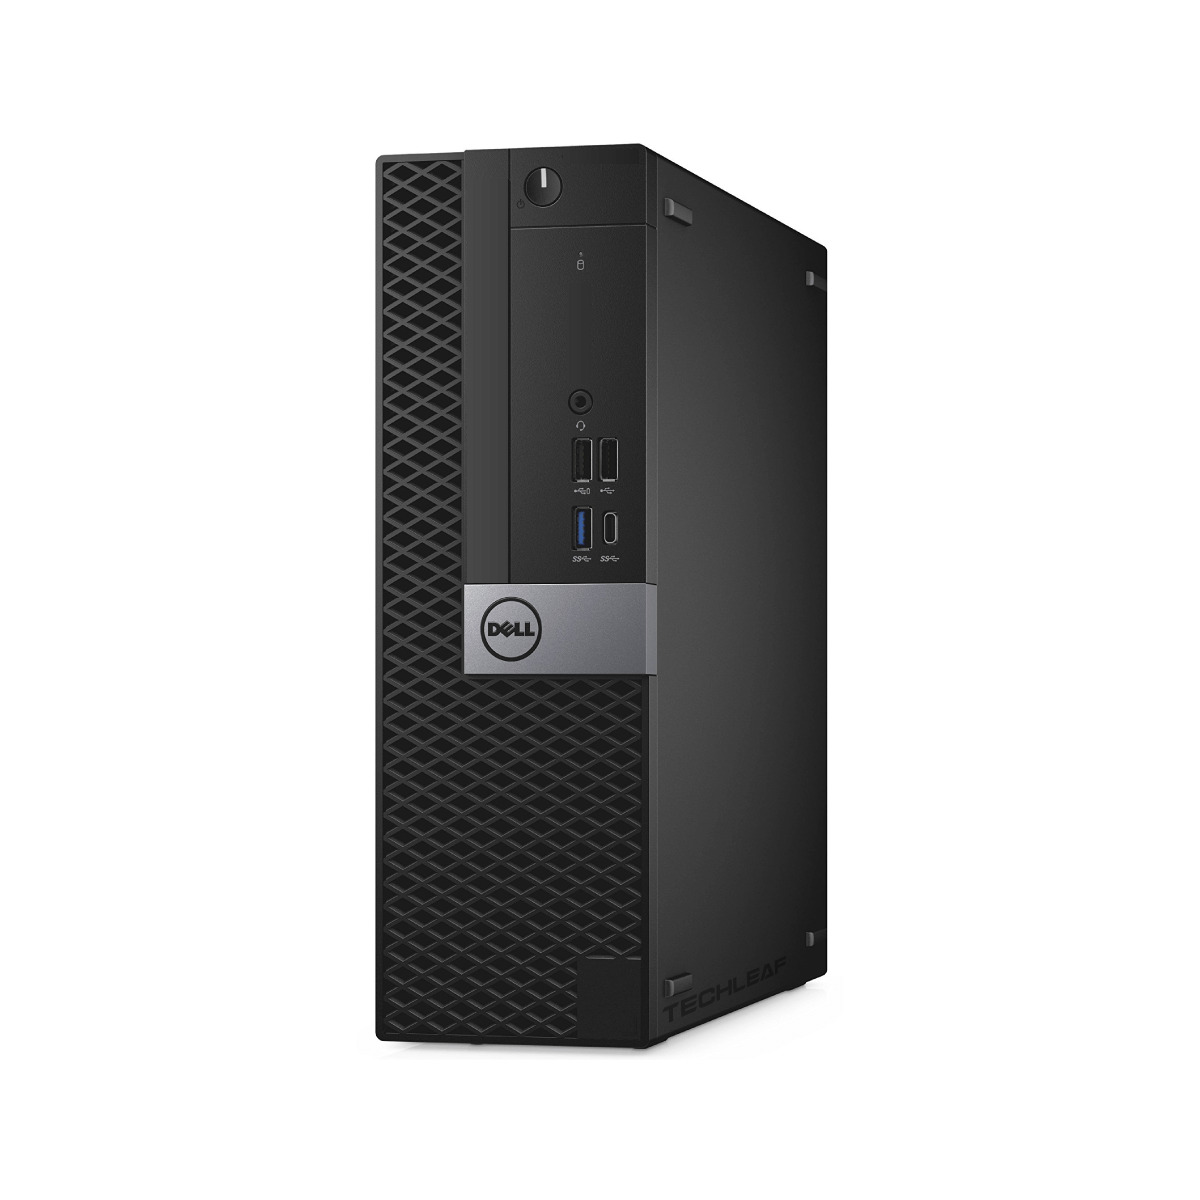 Dell i5 Desktop Computer PC up to 32GB RAM, 4TB SSD, 24